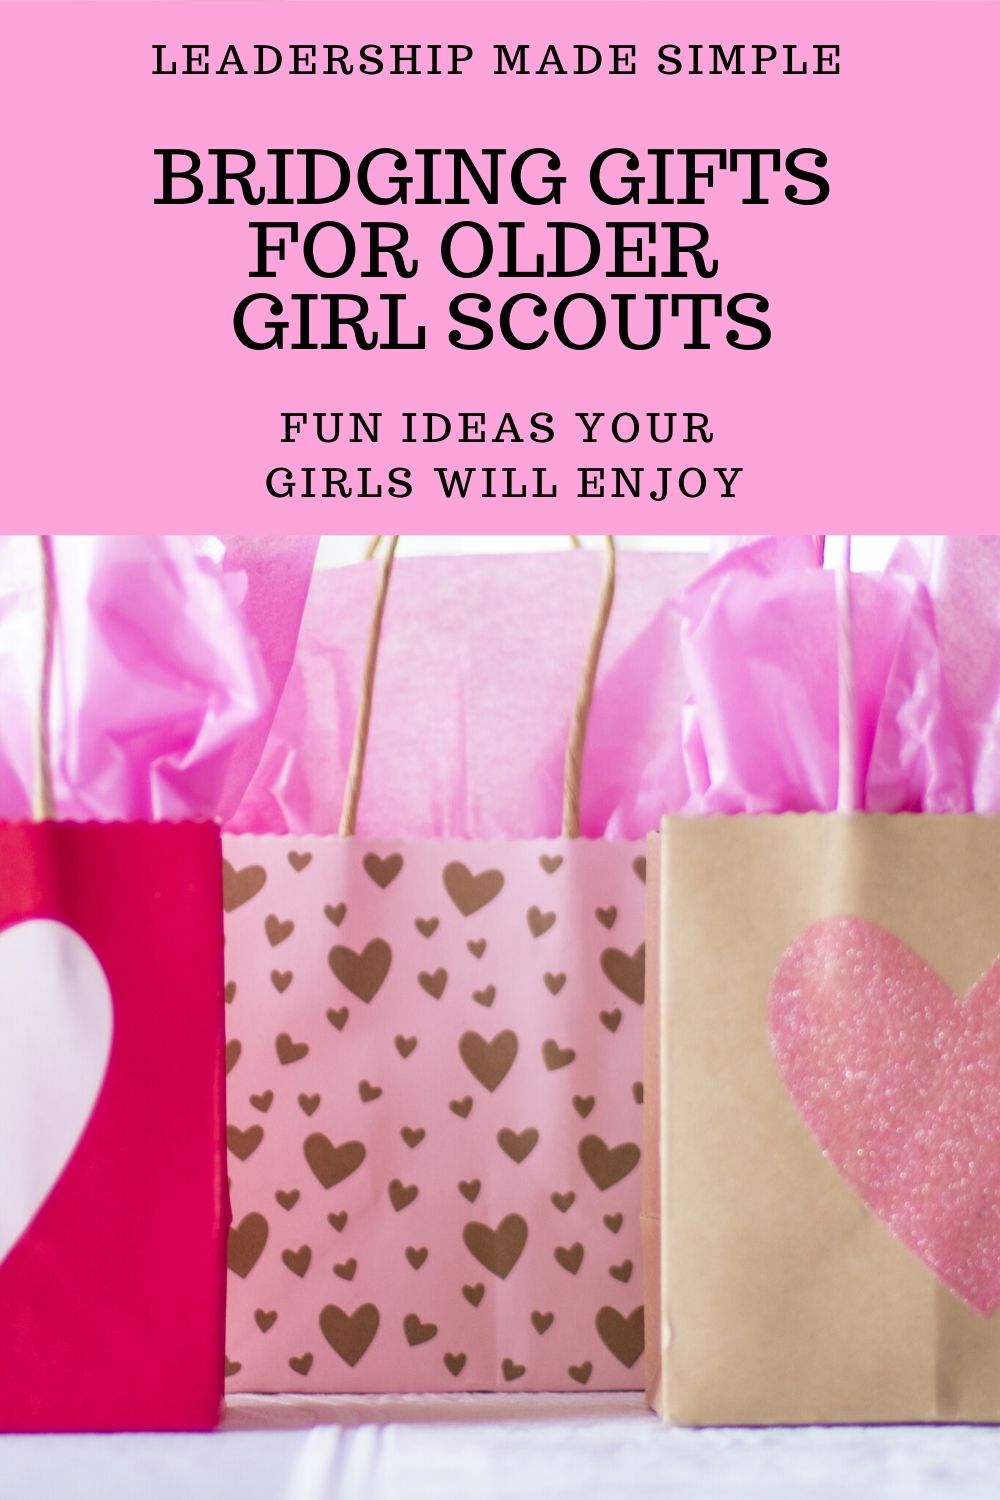 Bridging Gifts for Older Girl Scouts